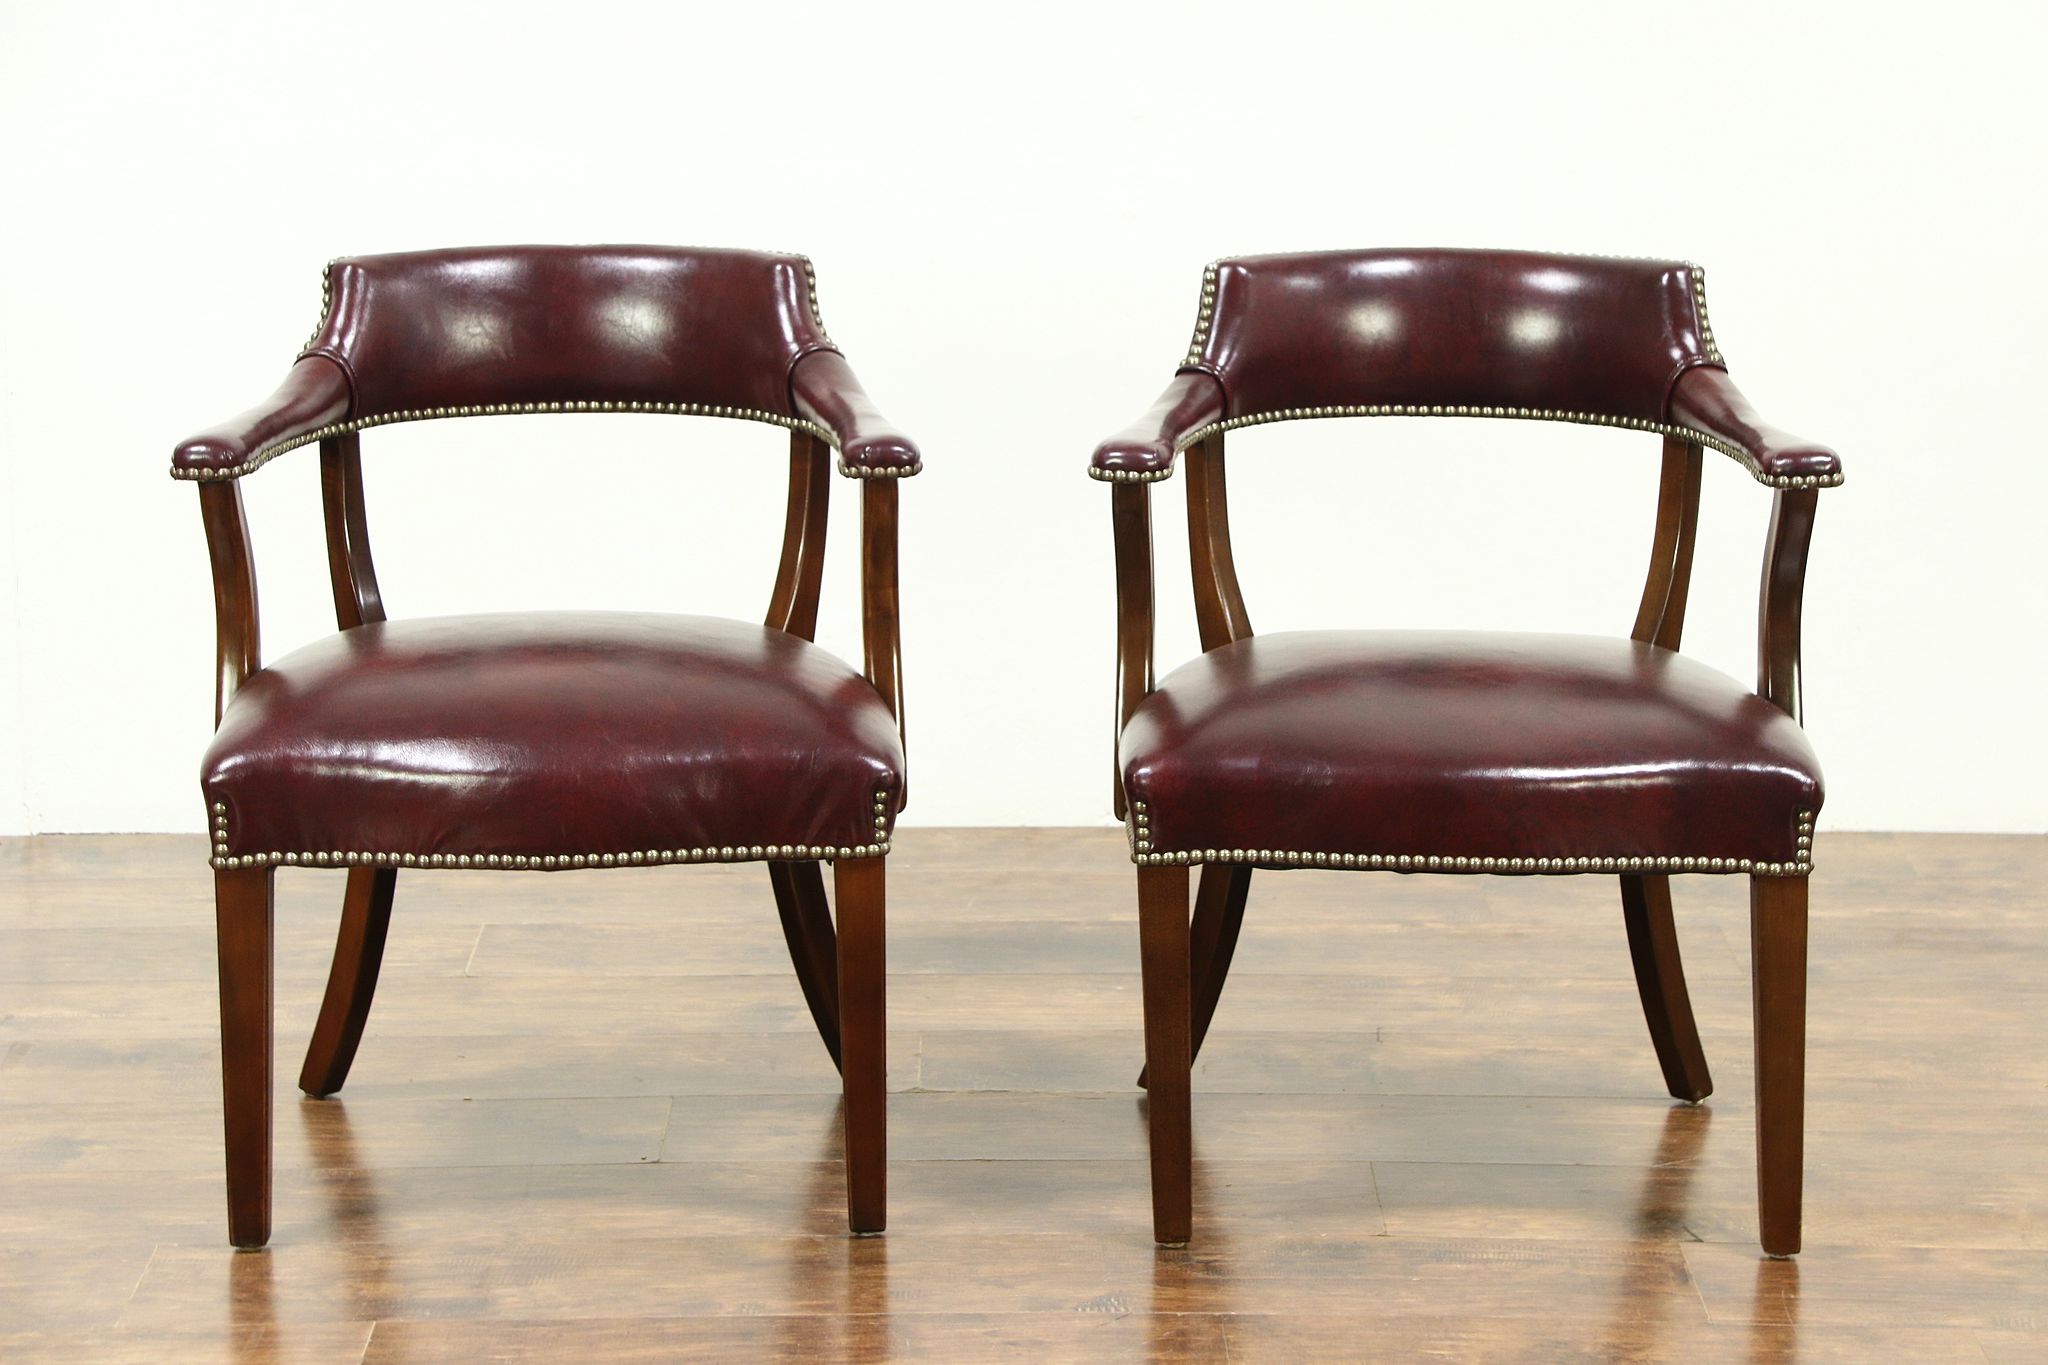 Sold Pair Of Bank Of London Vintage Library Or Office Chairs